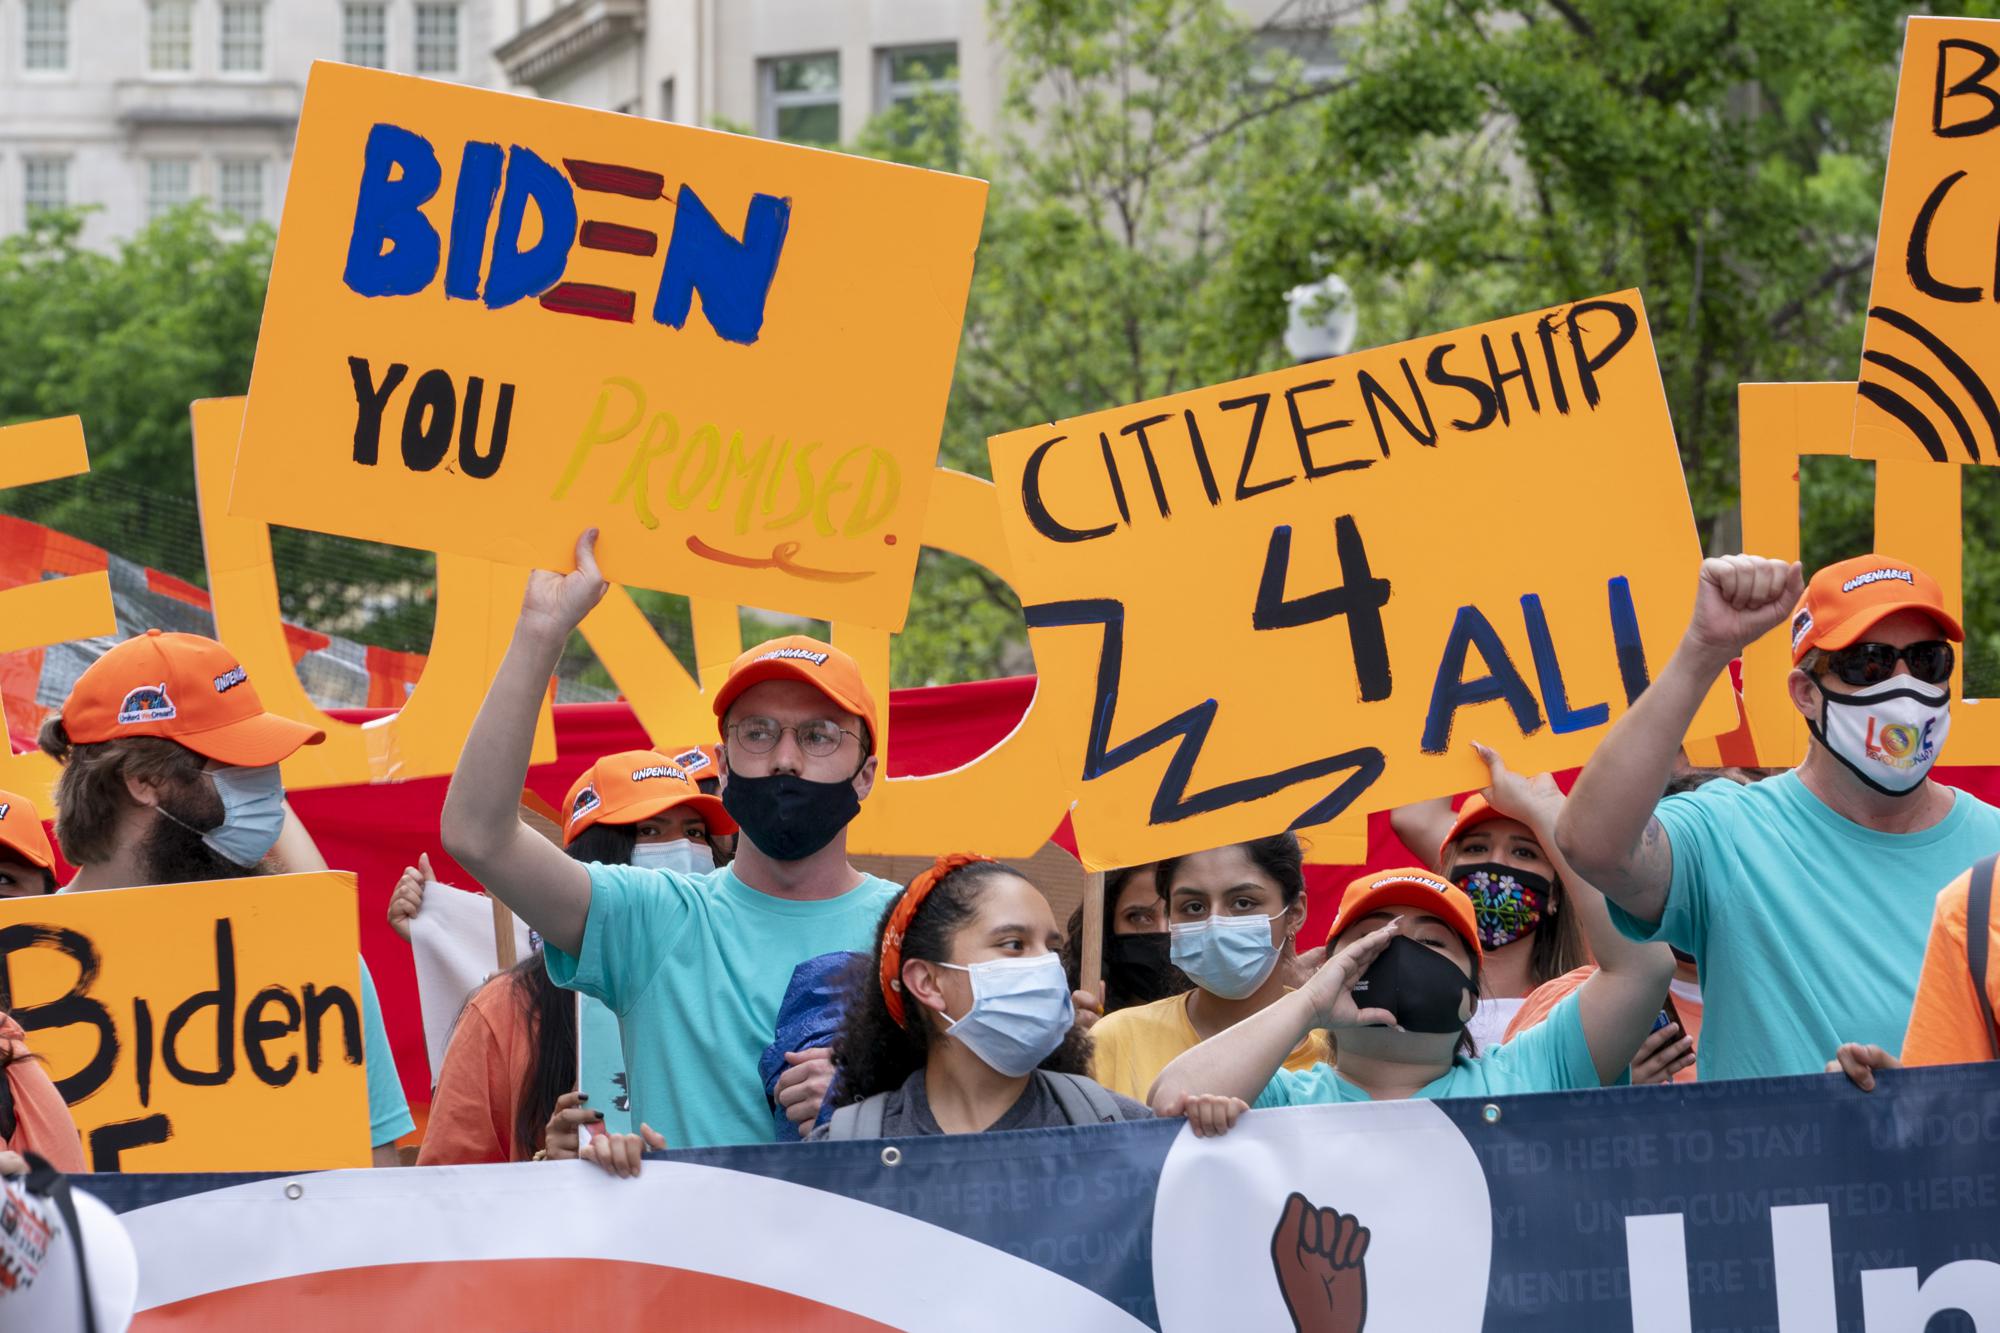 FILE - Supporters of immigration reform march while asking for a path to citizenship and an end to detentions and deportations, April 28, 2021, in Washington. Biden took office on Jan. 20 and almost immediately, numbers of migrants exceeded expectations. (AP Photo/Jacquelyn Martin, File)